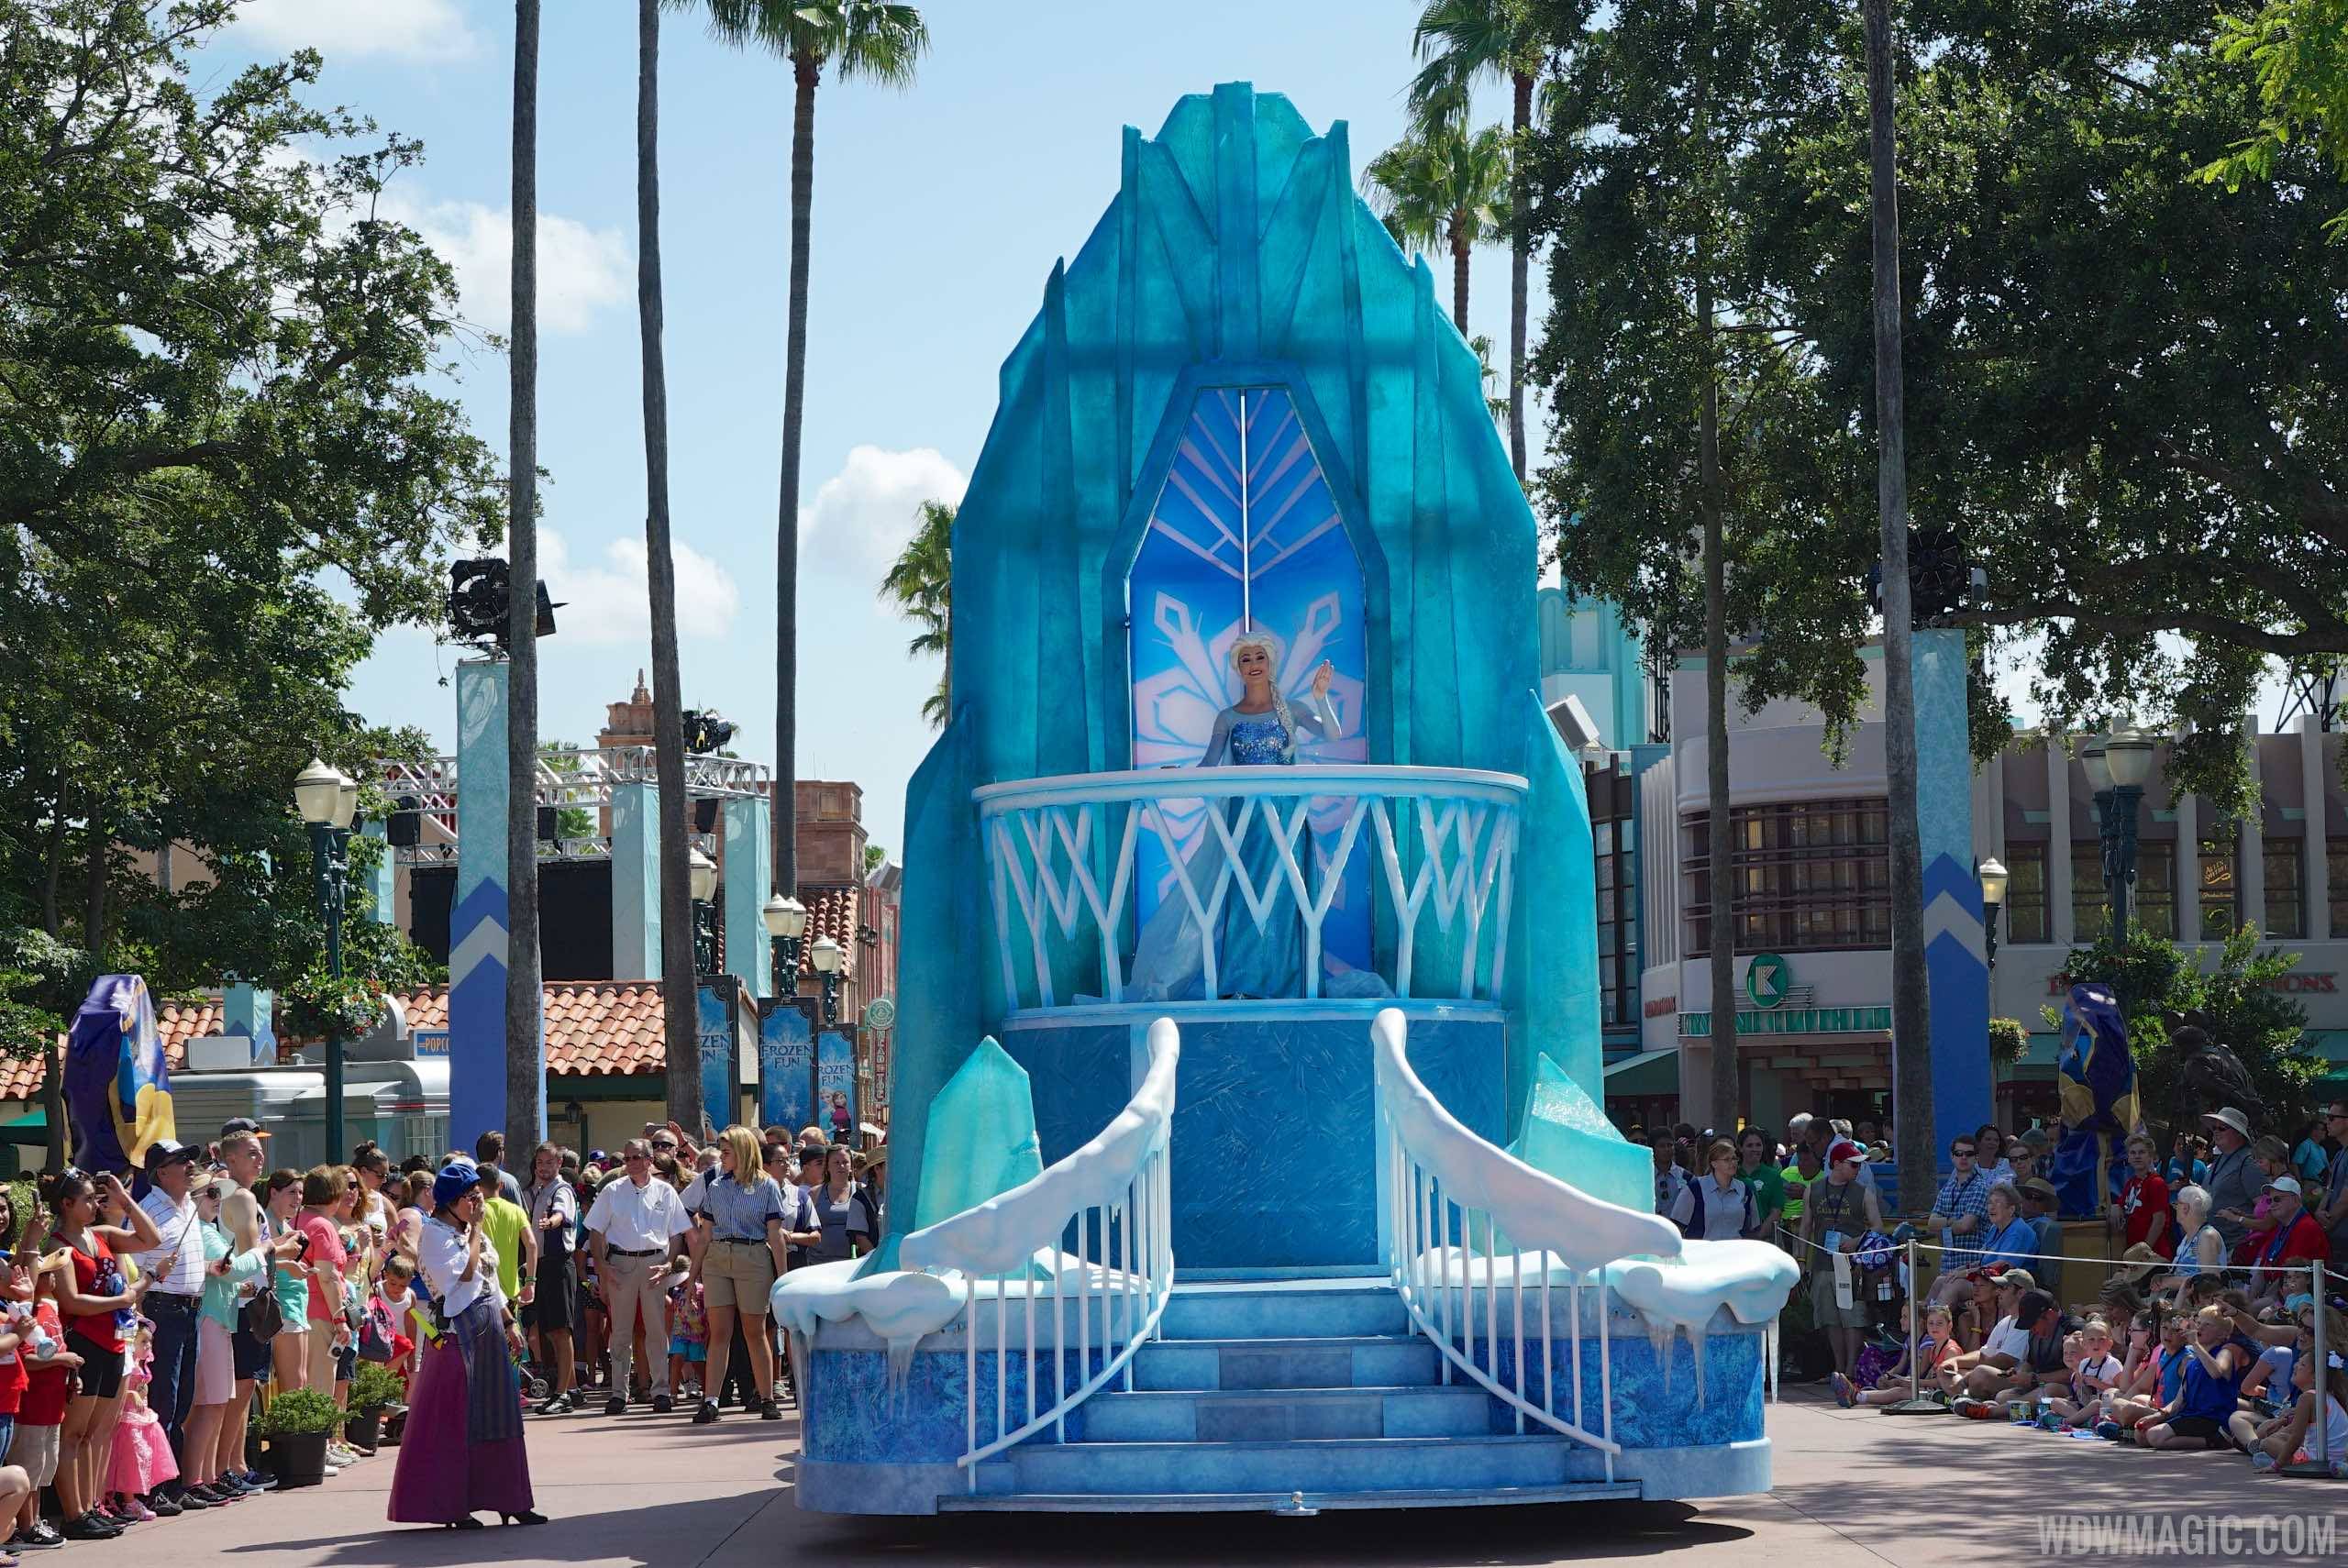 VIDEO - New pyro design for this year's Frozen Fireworks at Disney's Hollywood Studios